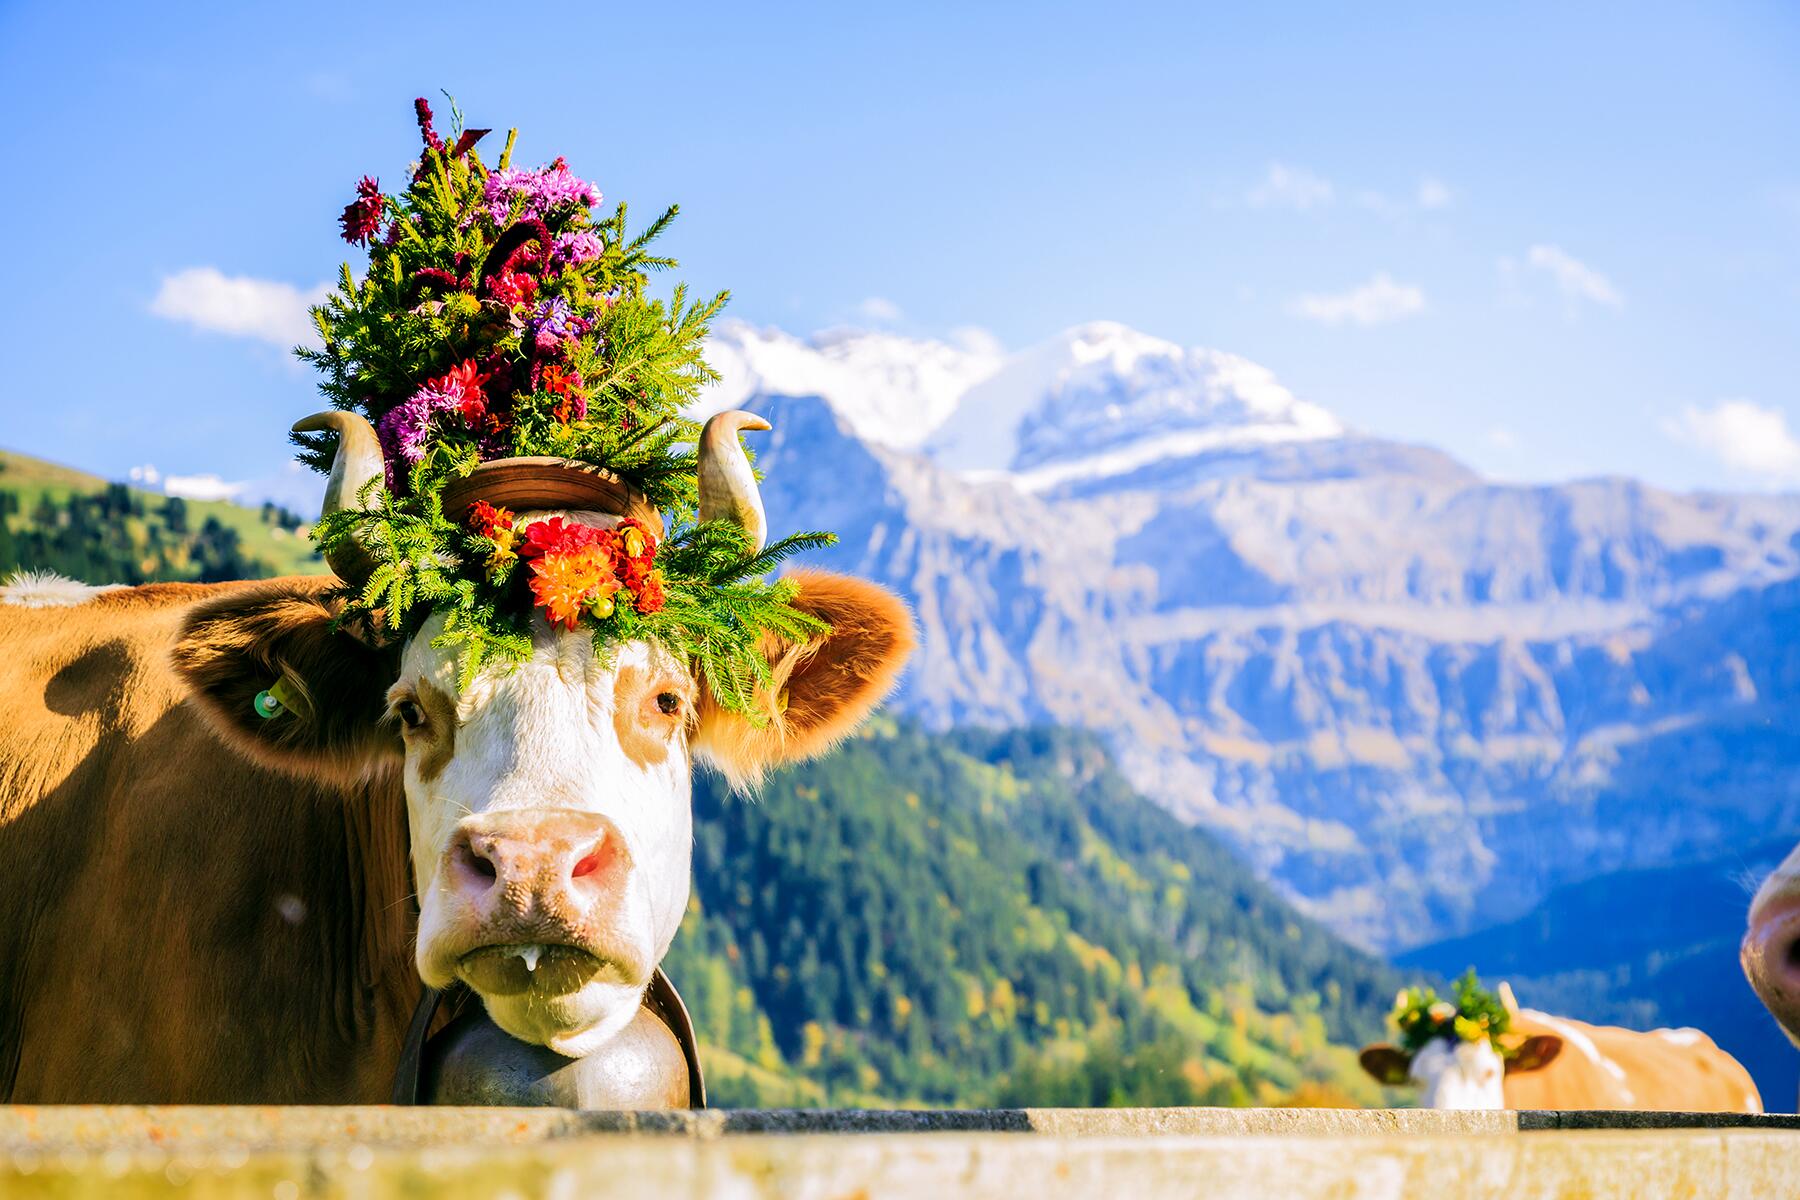 12 Fascinating Traditions You'll Only Find in Switzerland